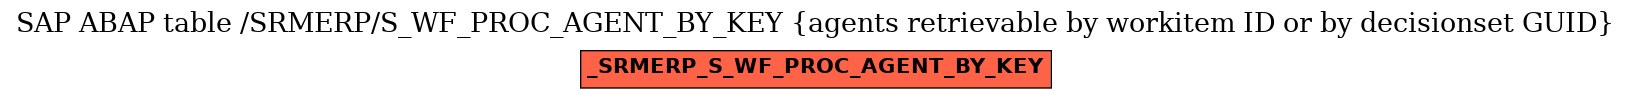 E-R Diagram for table /SRMERP/S_WF_PROC_AGENT_BY_KEY (agents retrievable by workitem ID or by decisionset GUID)